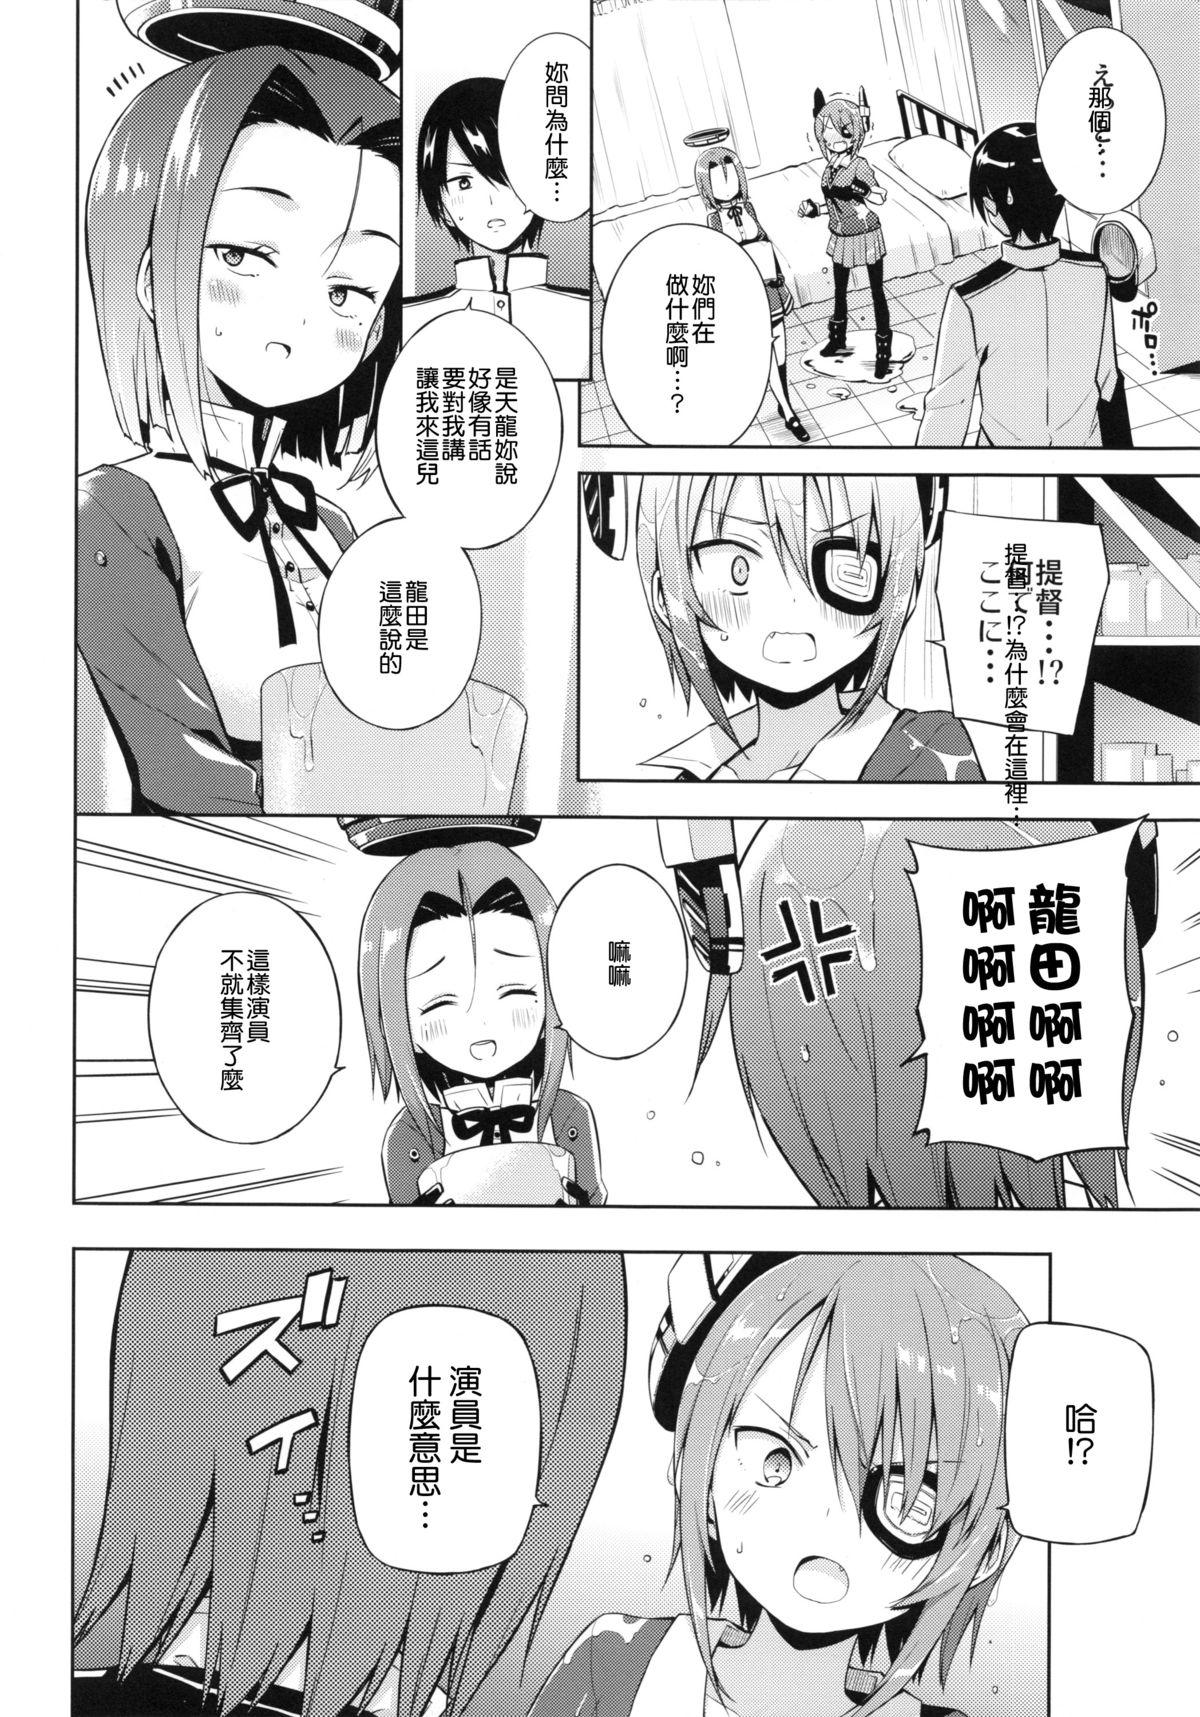 Moaning Tentatukore. - Kantai collection Highschool - Page 10